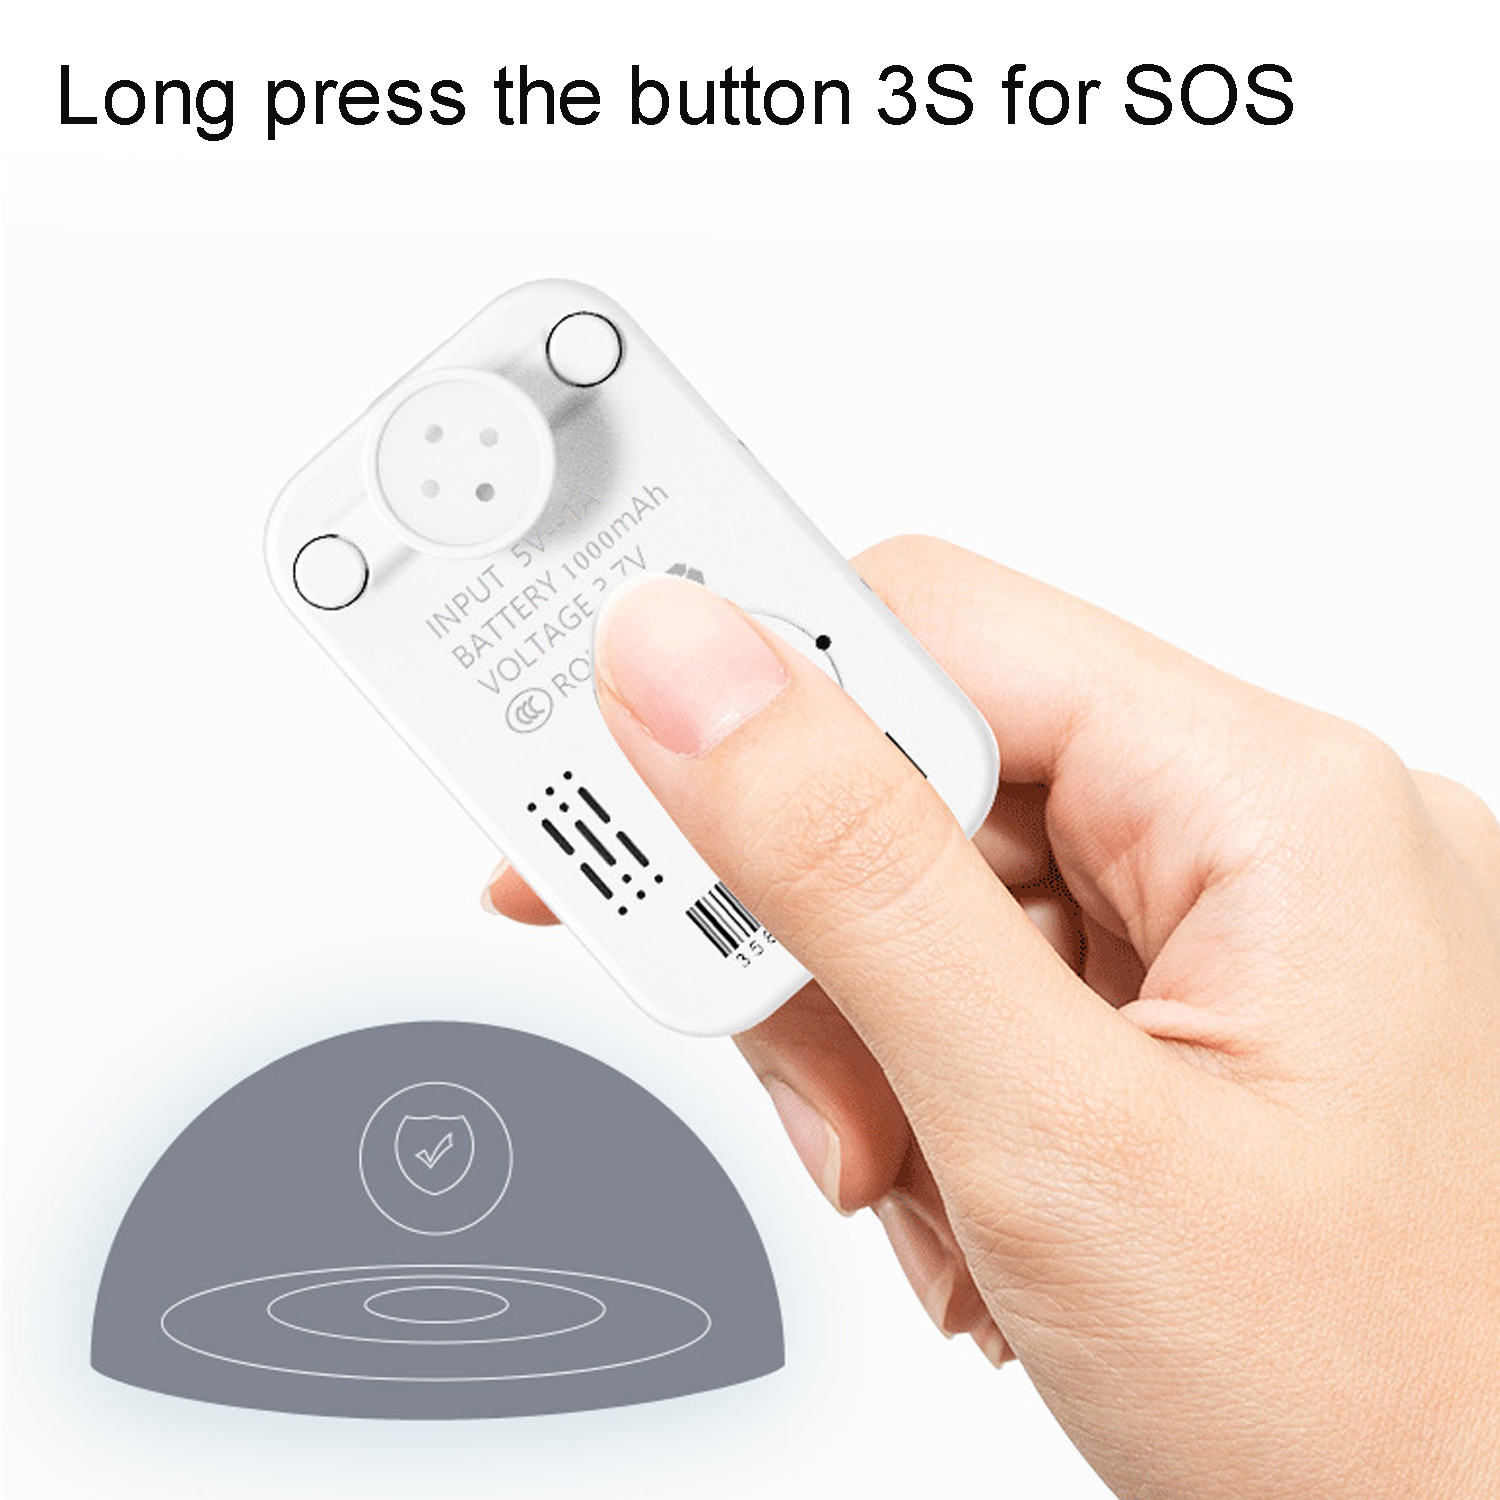 New Launched 2G 1000mAh Large Battery Capacity IP67 Waterproof Mini Hidden GPS Tracker with Button Pin for Kids A22